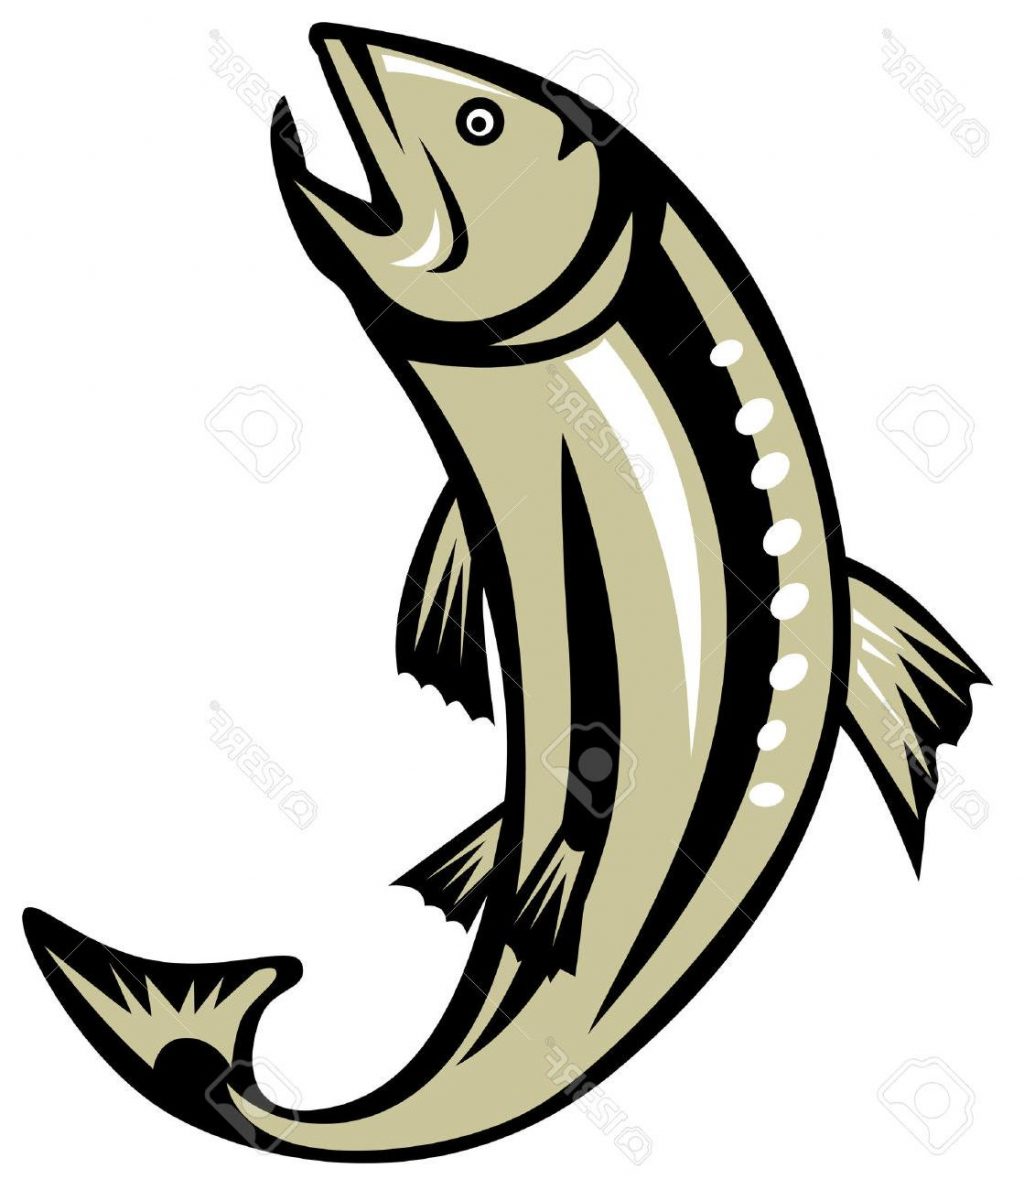 Collection of Salmon clipart.